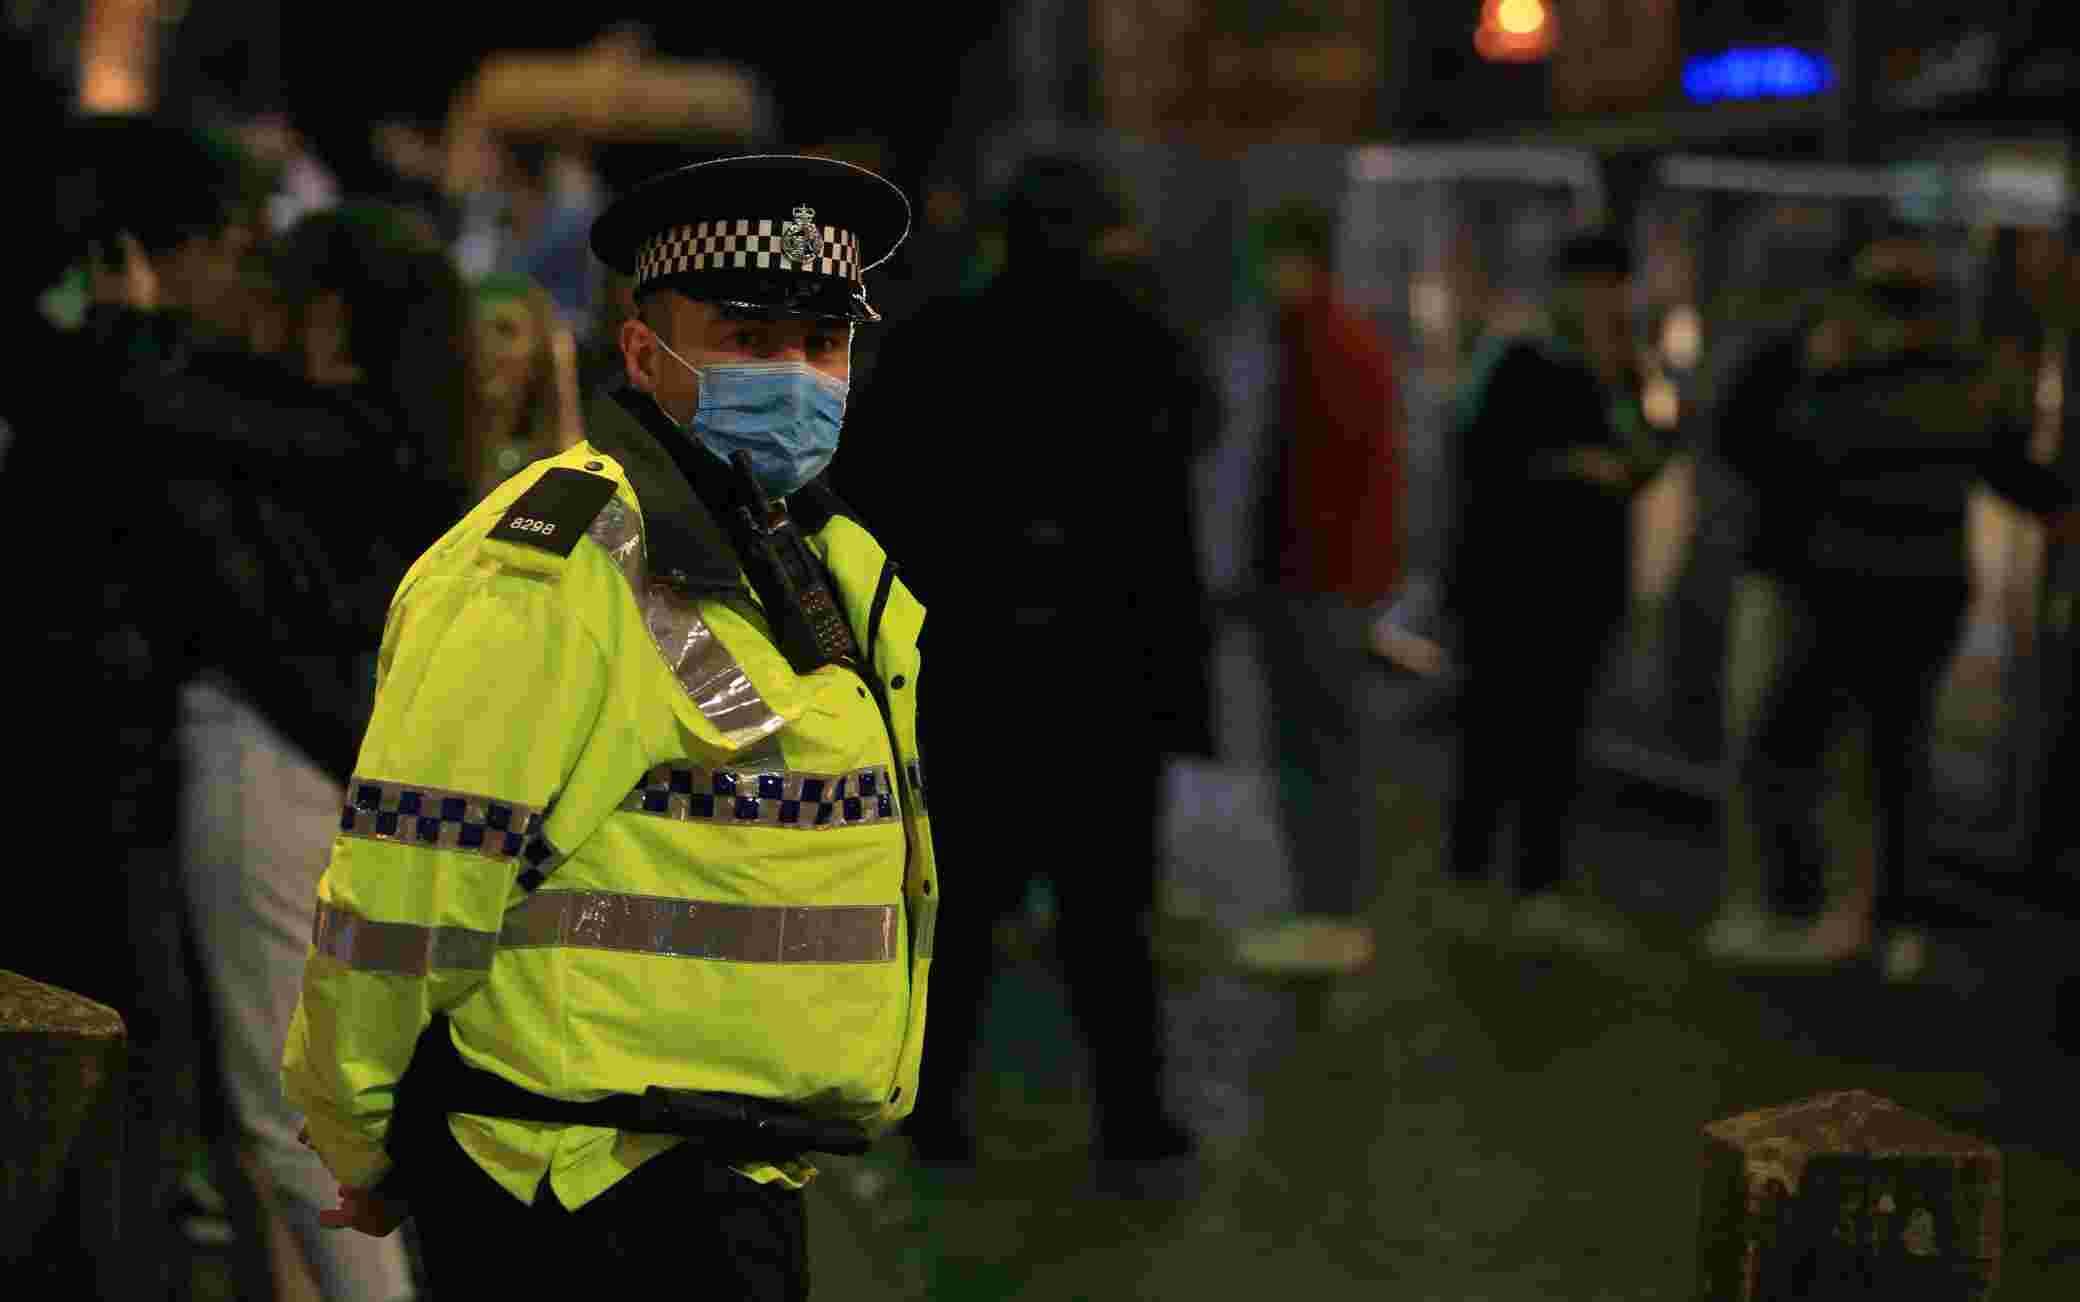 Police patrol as revellers enjoy a night out in the centre of Liverpool, north west England on October 10, 2020 ahead of new measures set to be introduced in the northwest next week to help stem the spread of the novel coronavirus. - Prime Minister Boris Johnson is expected to outline the new regime on Monday as rates of Covid 19 infection surge particularly in the north, worsening a national death toll of more than 42,000 which is already the worst in Europe. (Photo by Lindsey Parnaby / AFP) (Photo by LINDSEY PARNABY/AFP via Getty Images)